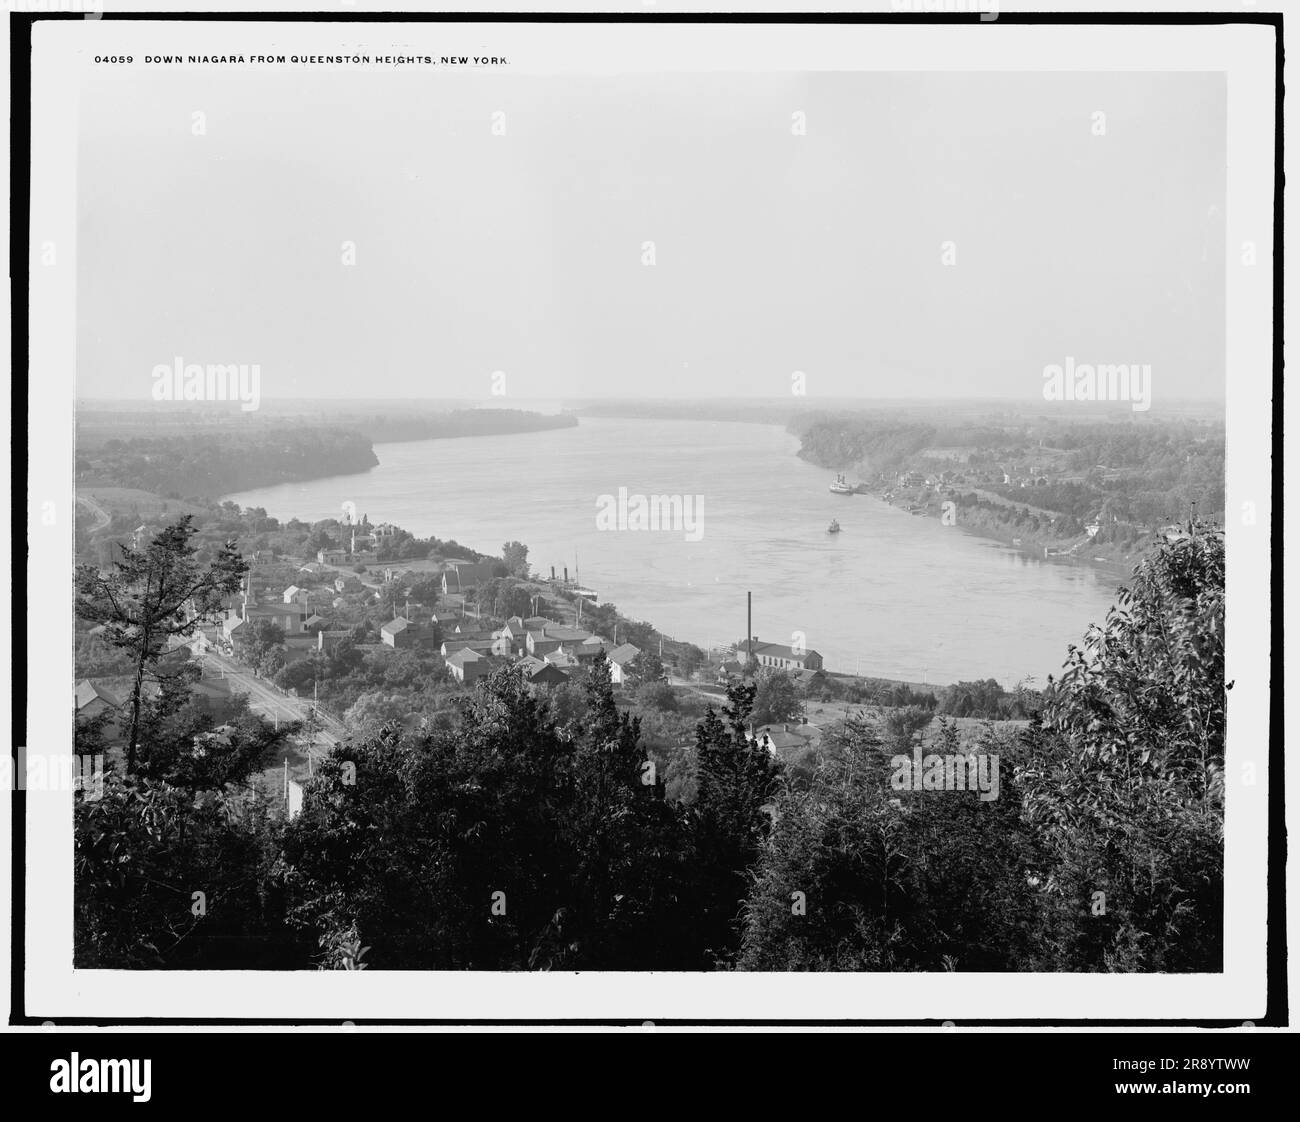 Down Niagara from Queenston Heights, New York i.e., Canada, between 1890 and 1905. Stock Photo